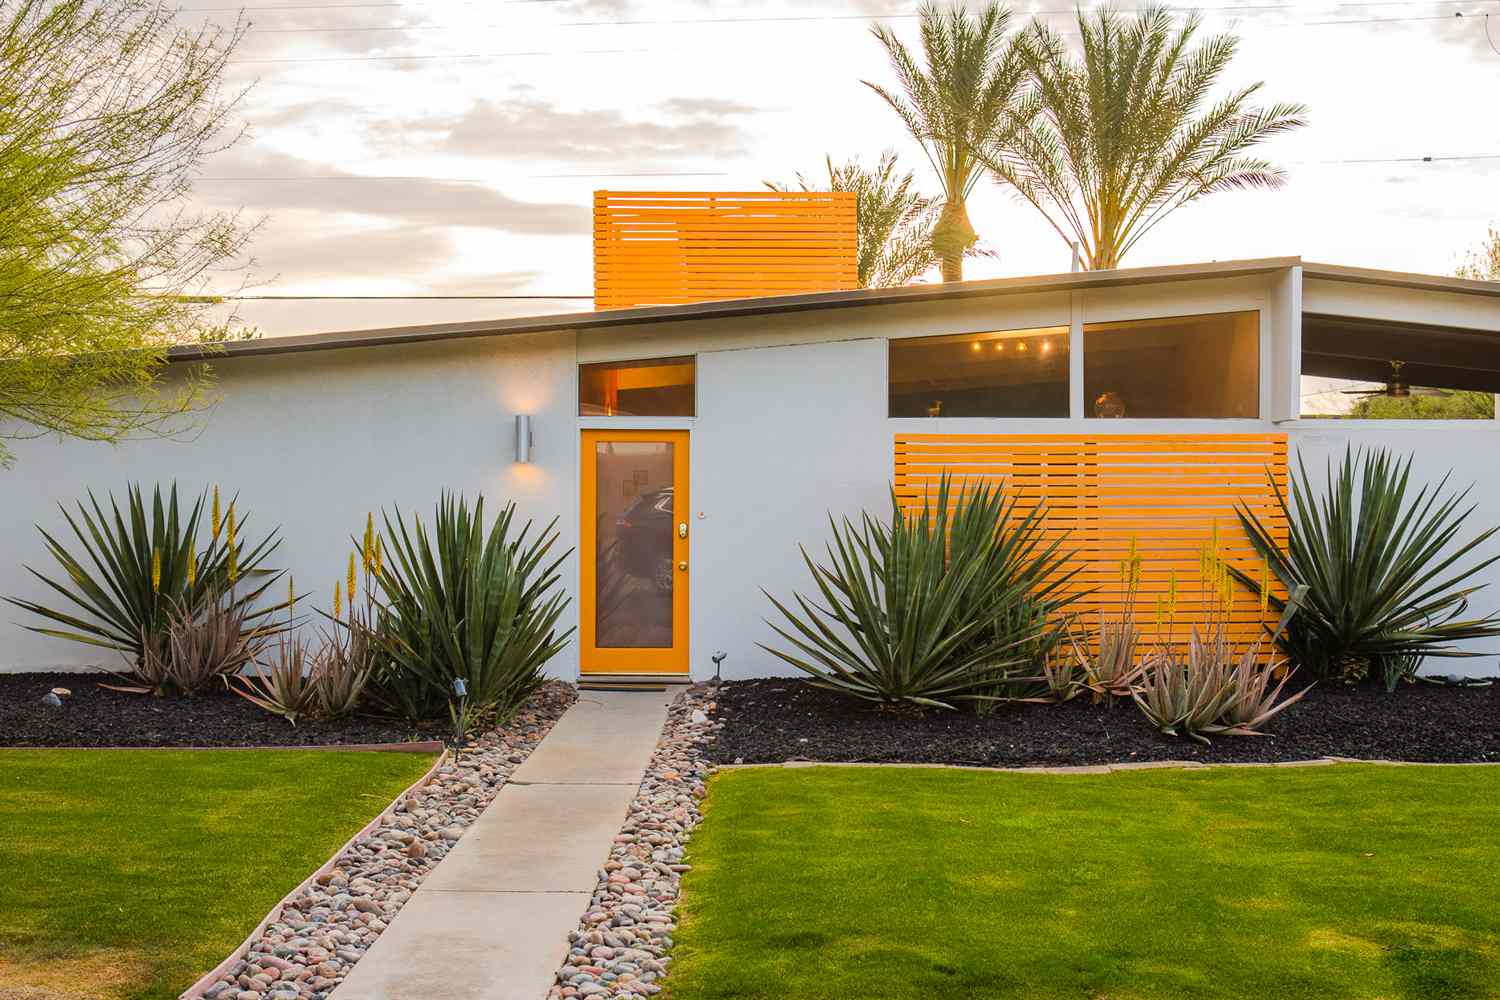 Yellow and white mid-century modern home with large plants in front